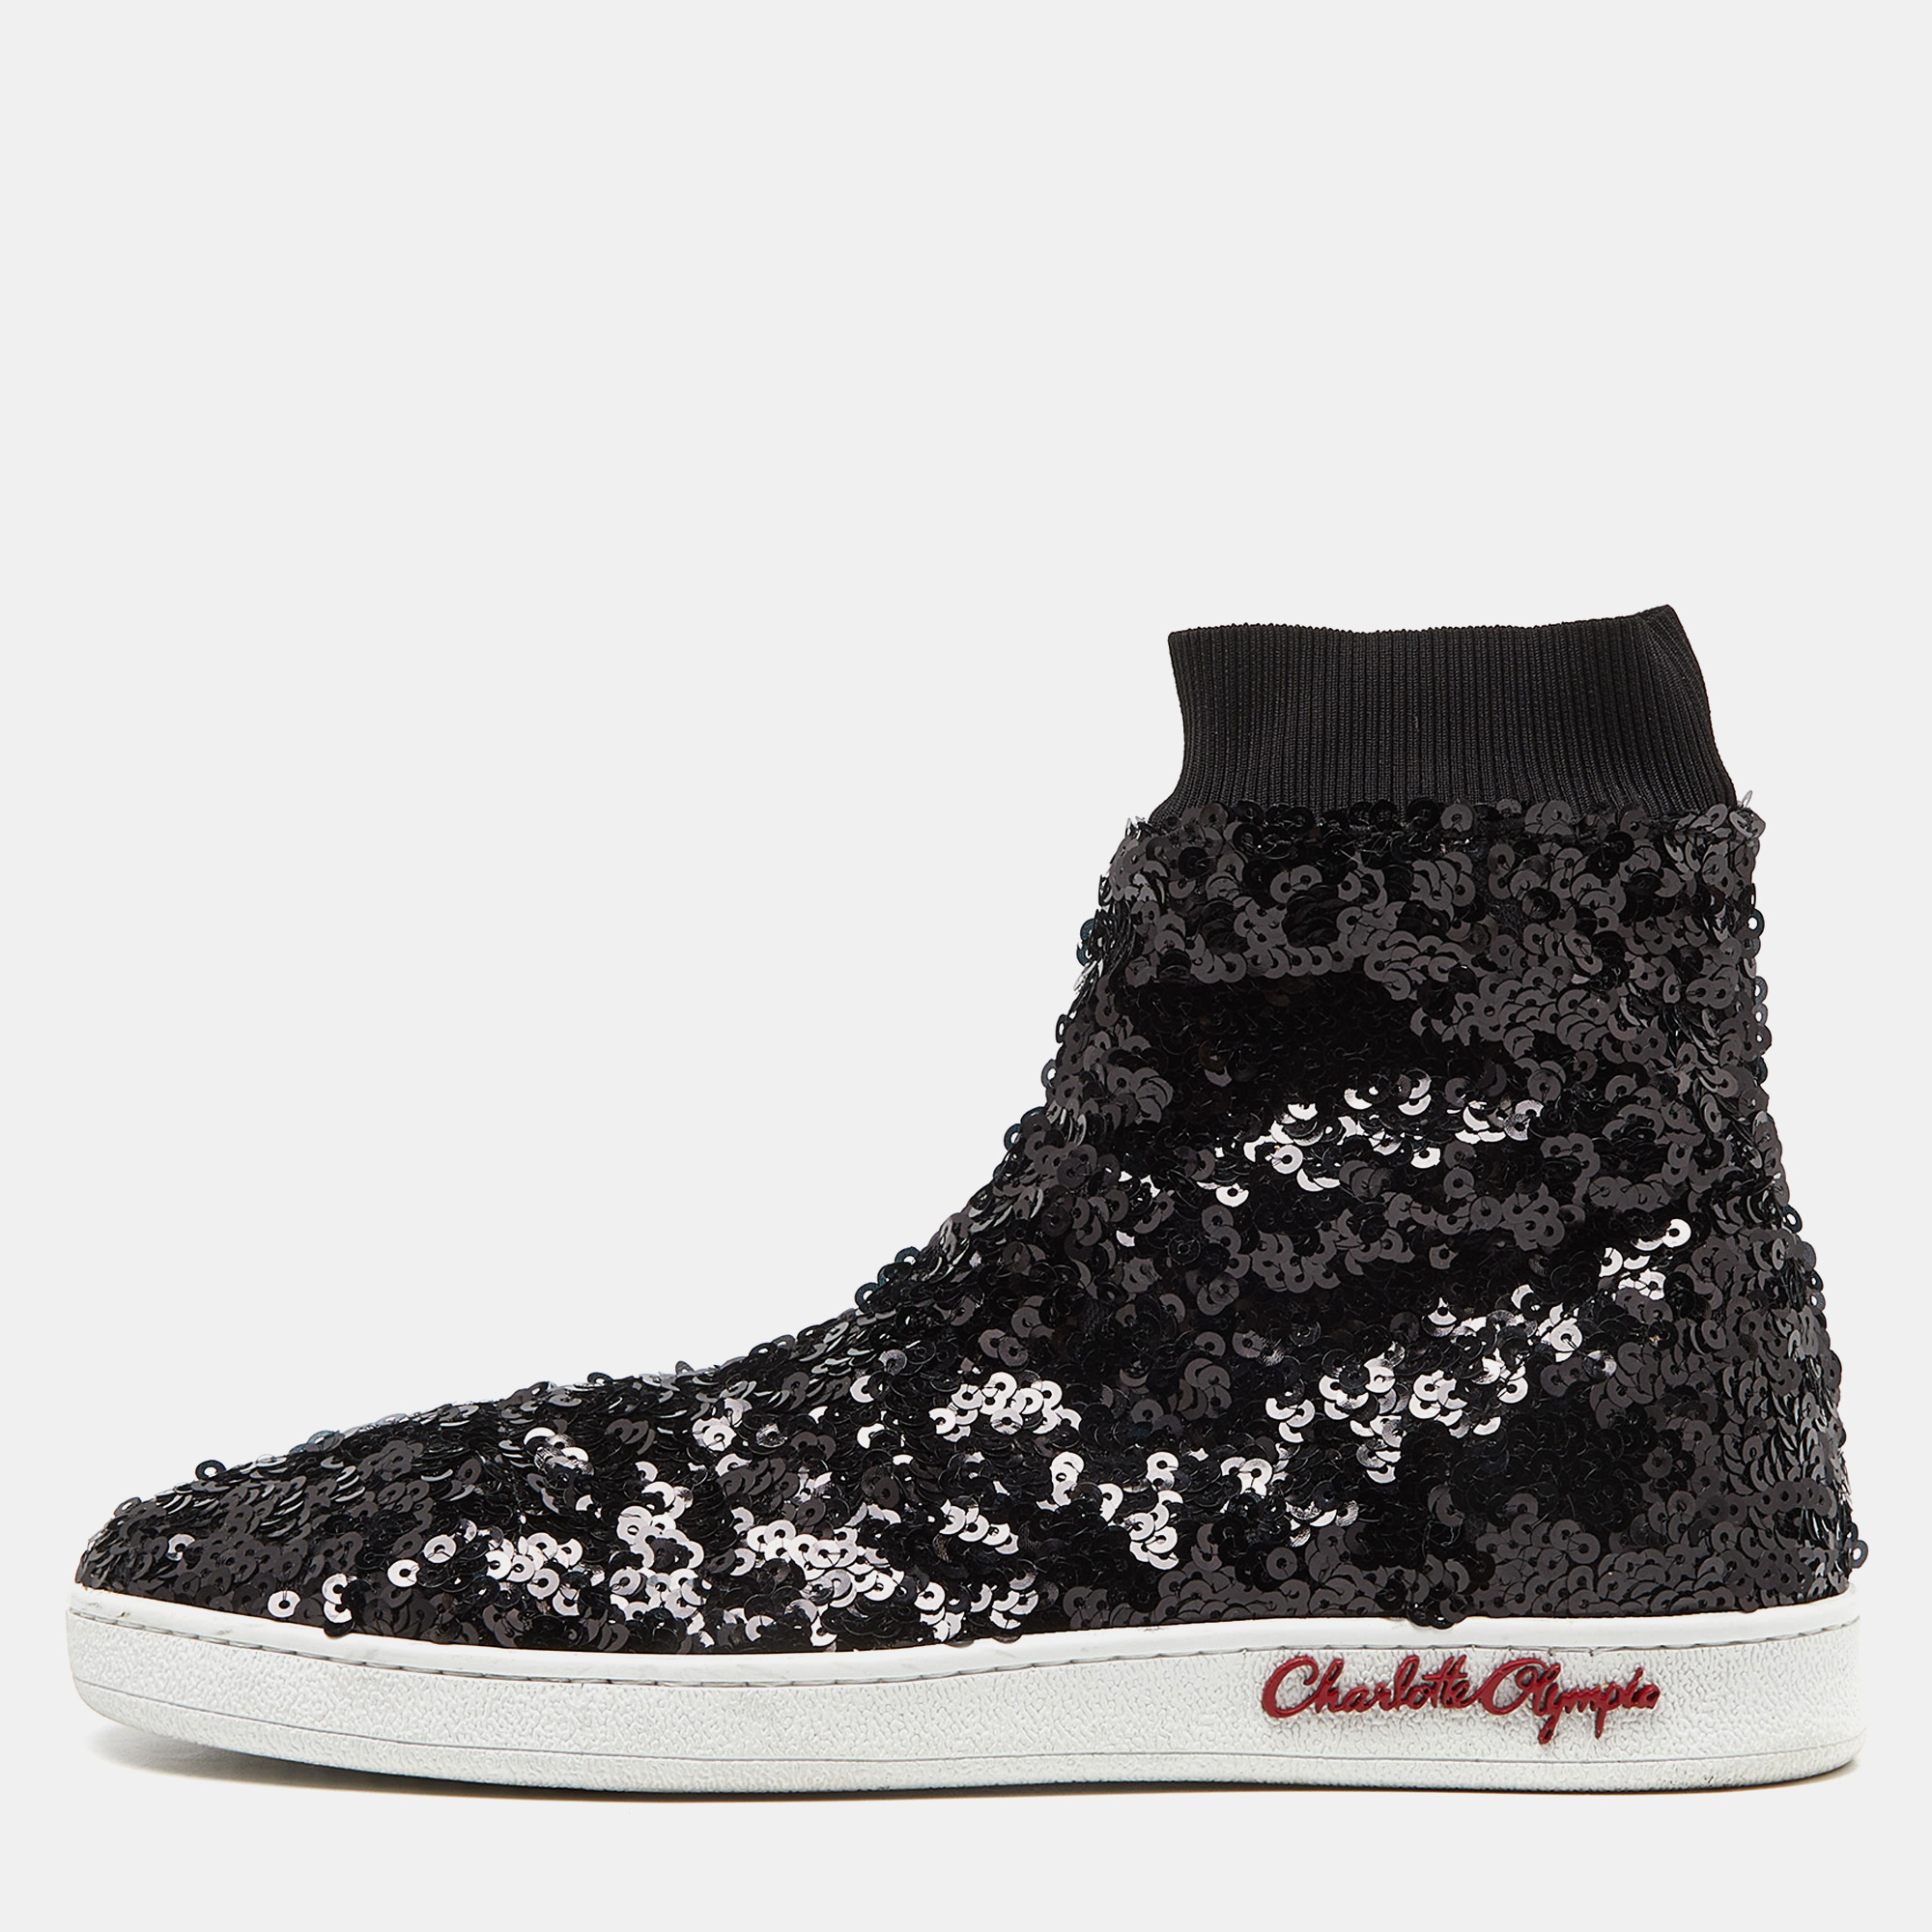 Pre-owned Charlotte Olympia Black Sequin Sock Sneakers Size 39